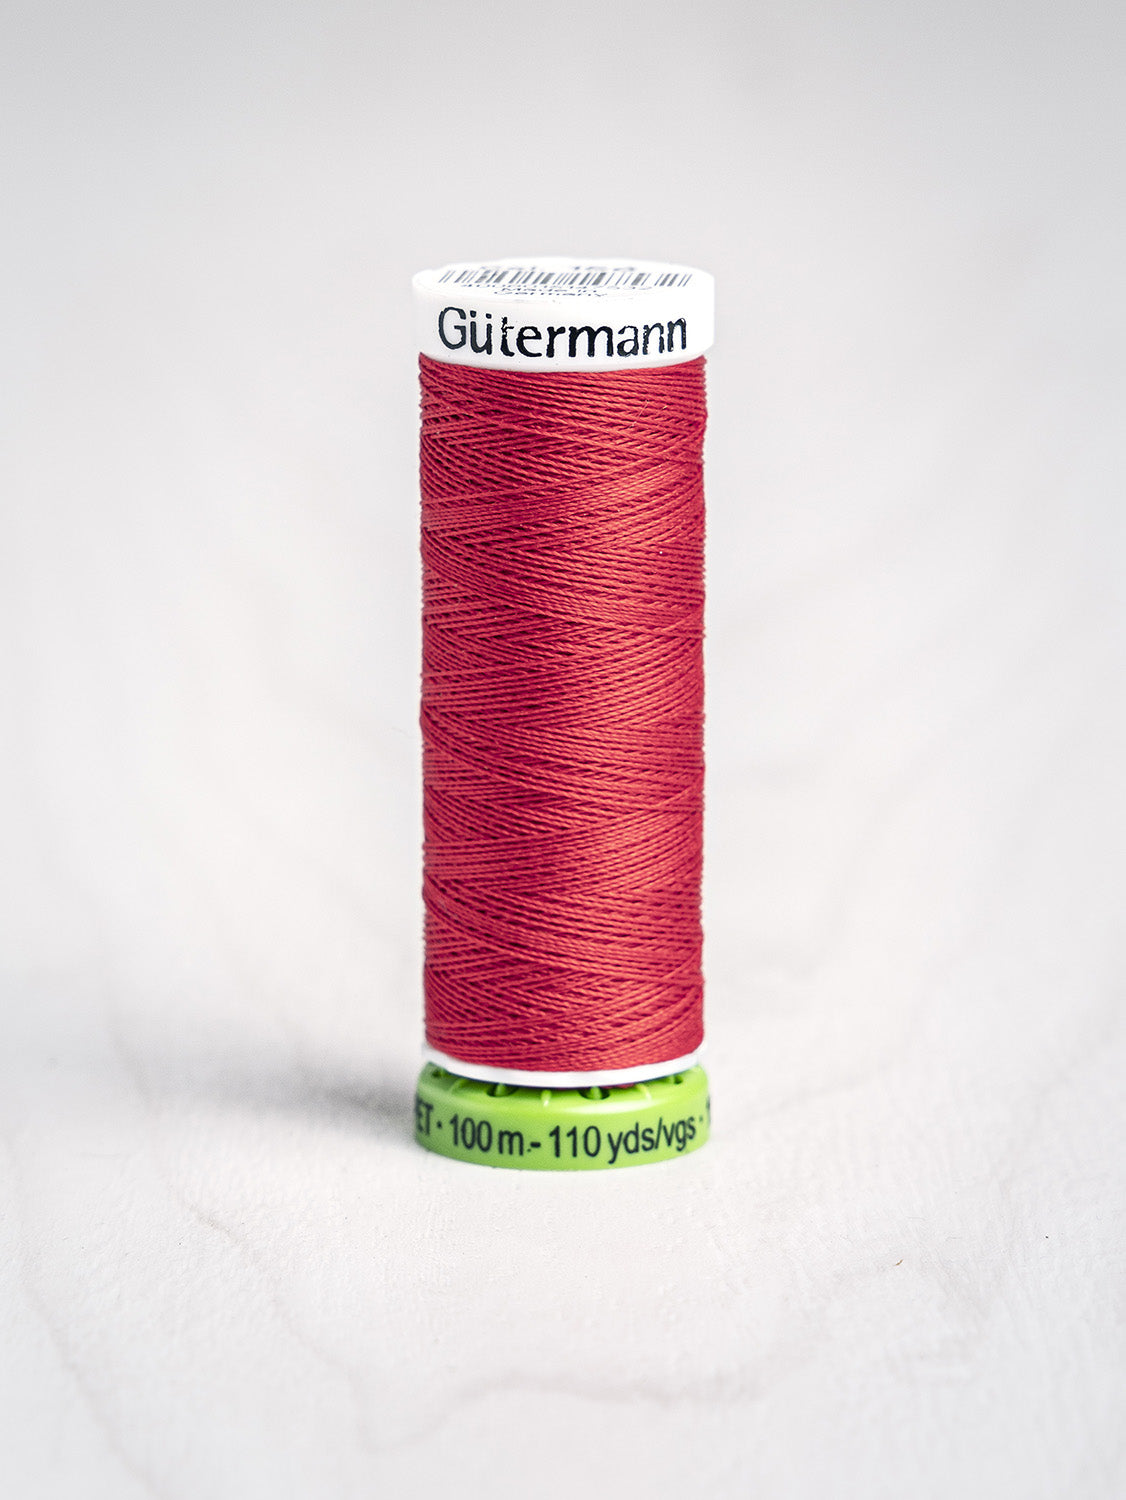 Gütermann All Purpose rPET Recycled Thread - Bright Red 156 | Core Fabrics